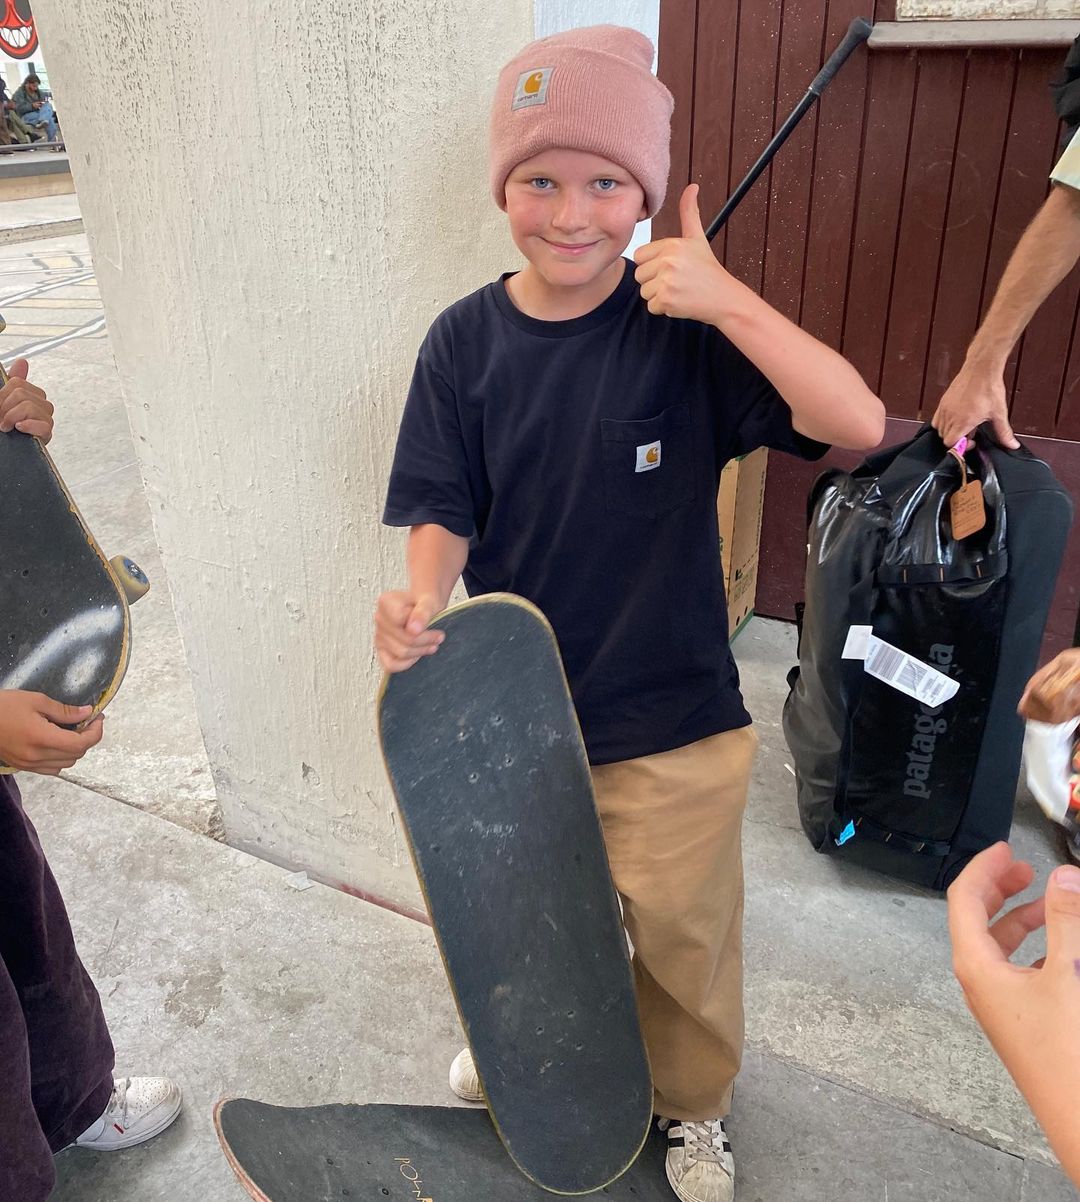 smiling kid with surfboard